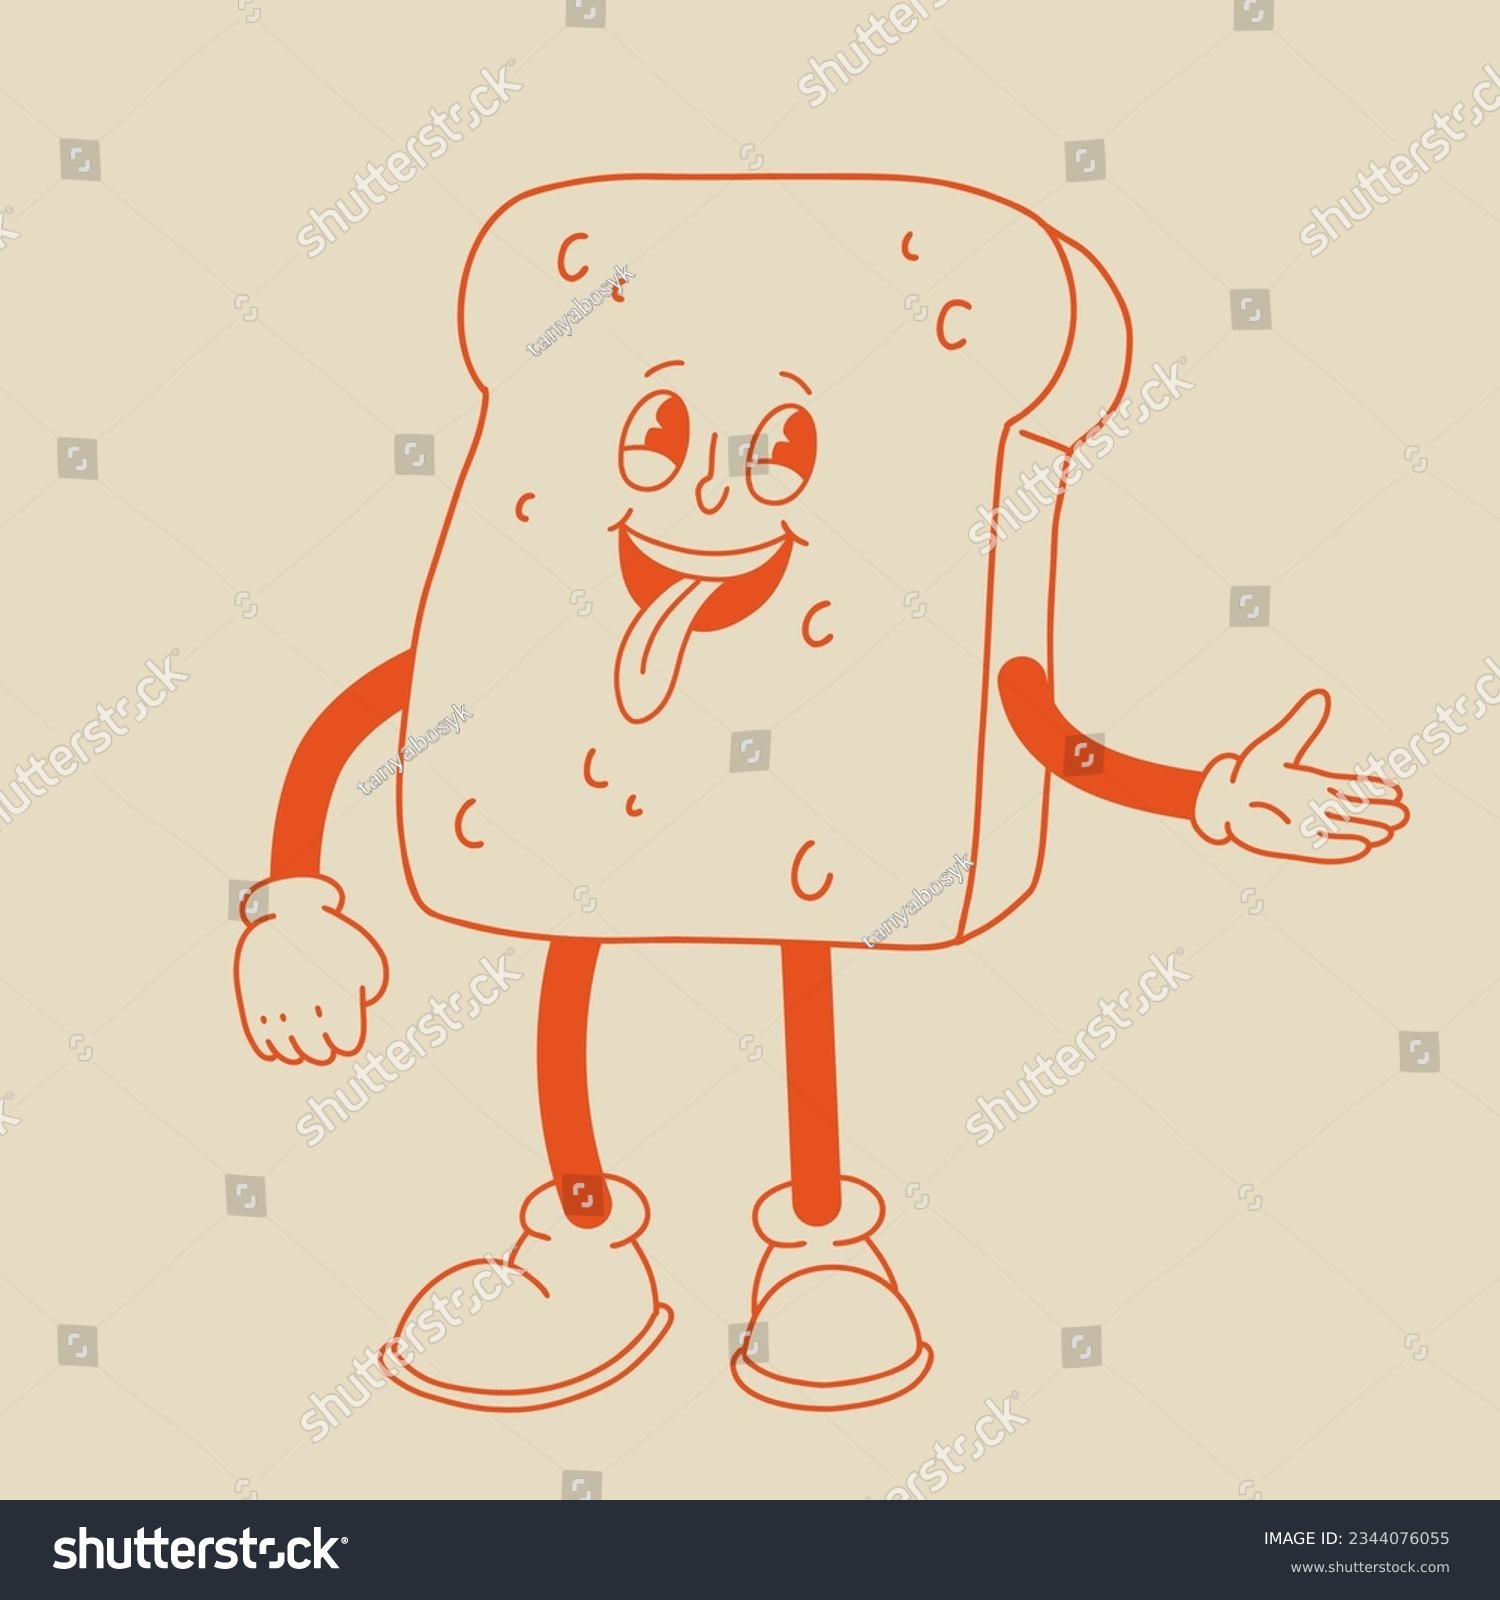 SVG of Vector cartoon retro mascot of bread, pastry, burger, sandwich. Vintage style 70s, 60s, 50s character. Groovy art for bakery and restaurants svg